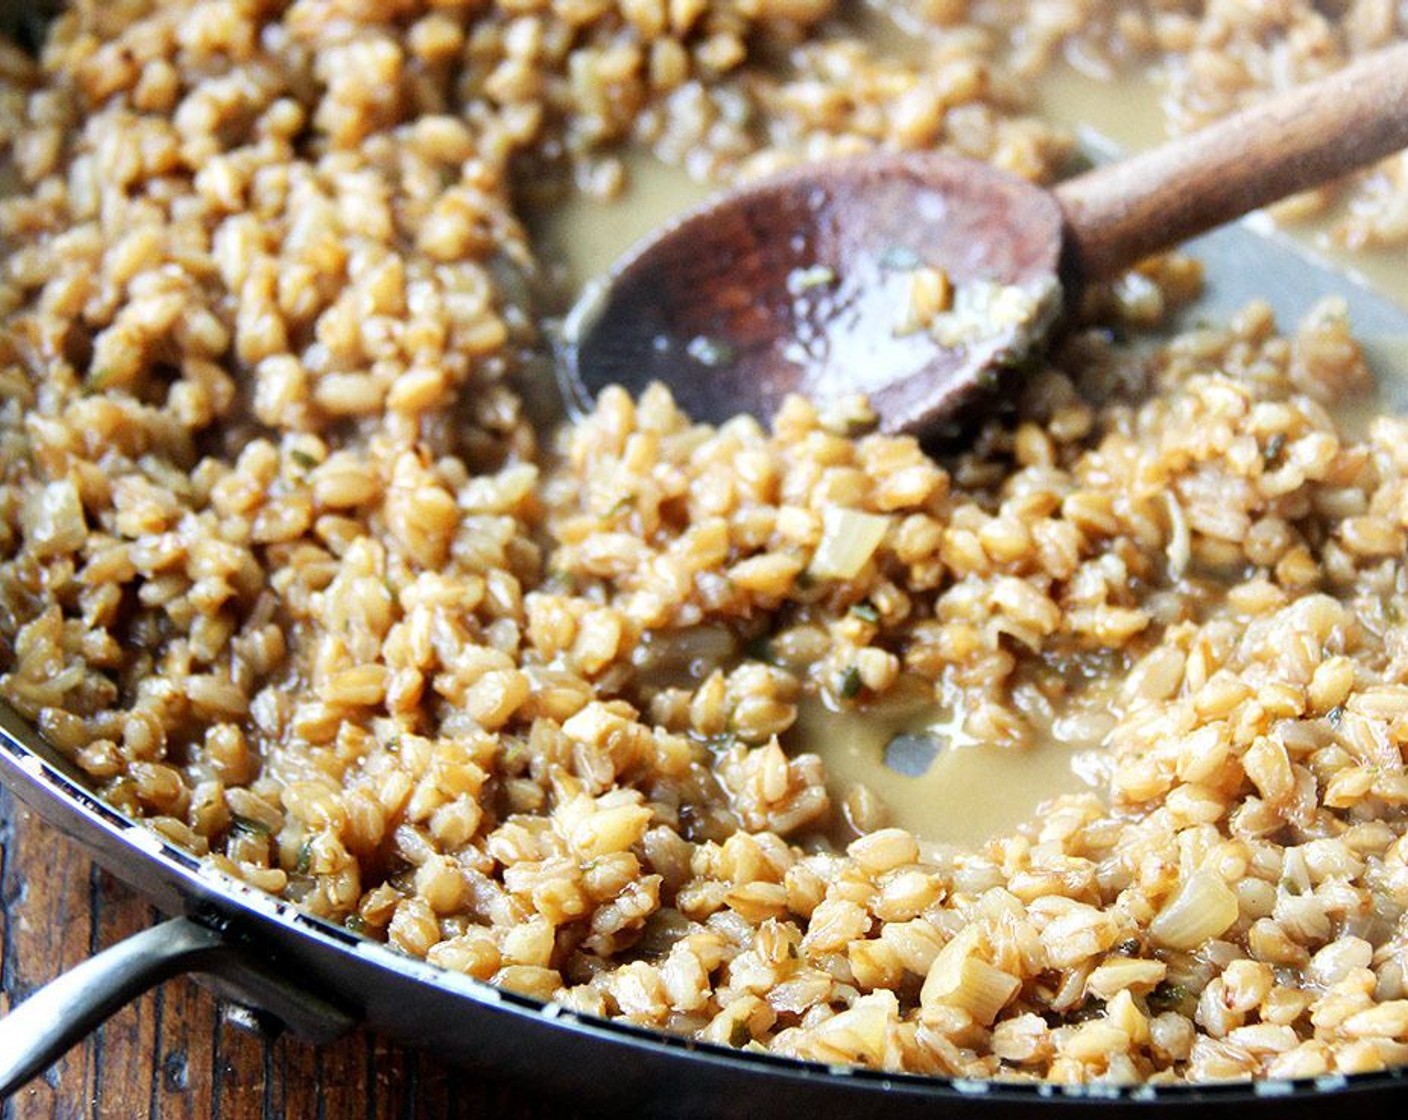 step 7 Continue cooking, adding ½ cup of warm stock at a time, stirring to prevent scorching and letting each addition be absorbed before adding the next, until the farro grains have expanded and are al dente, about 1 hour. The farro will look creamy like risotto.